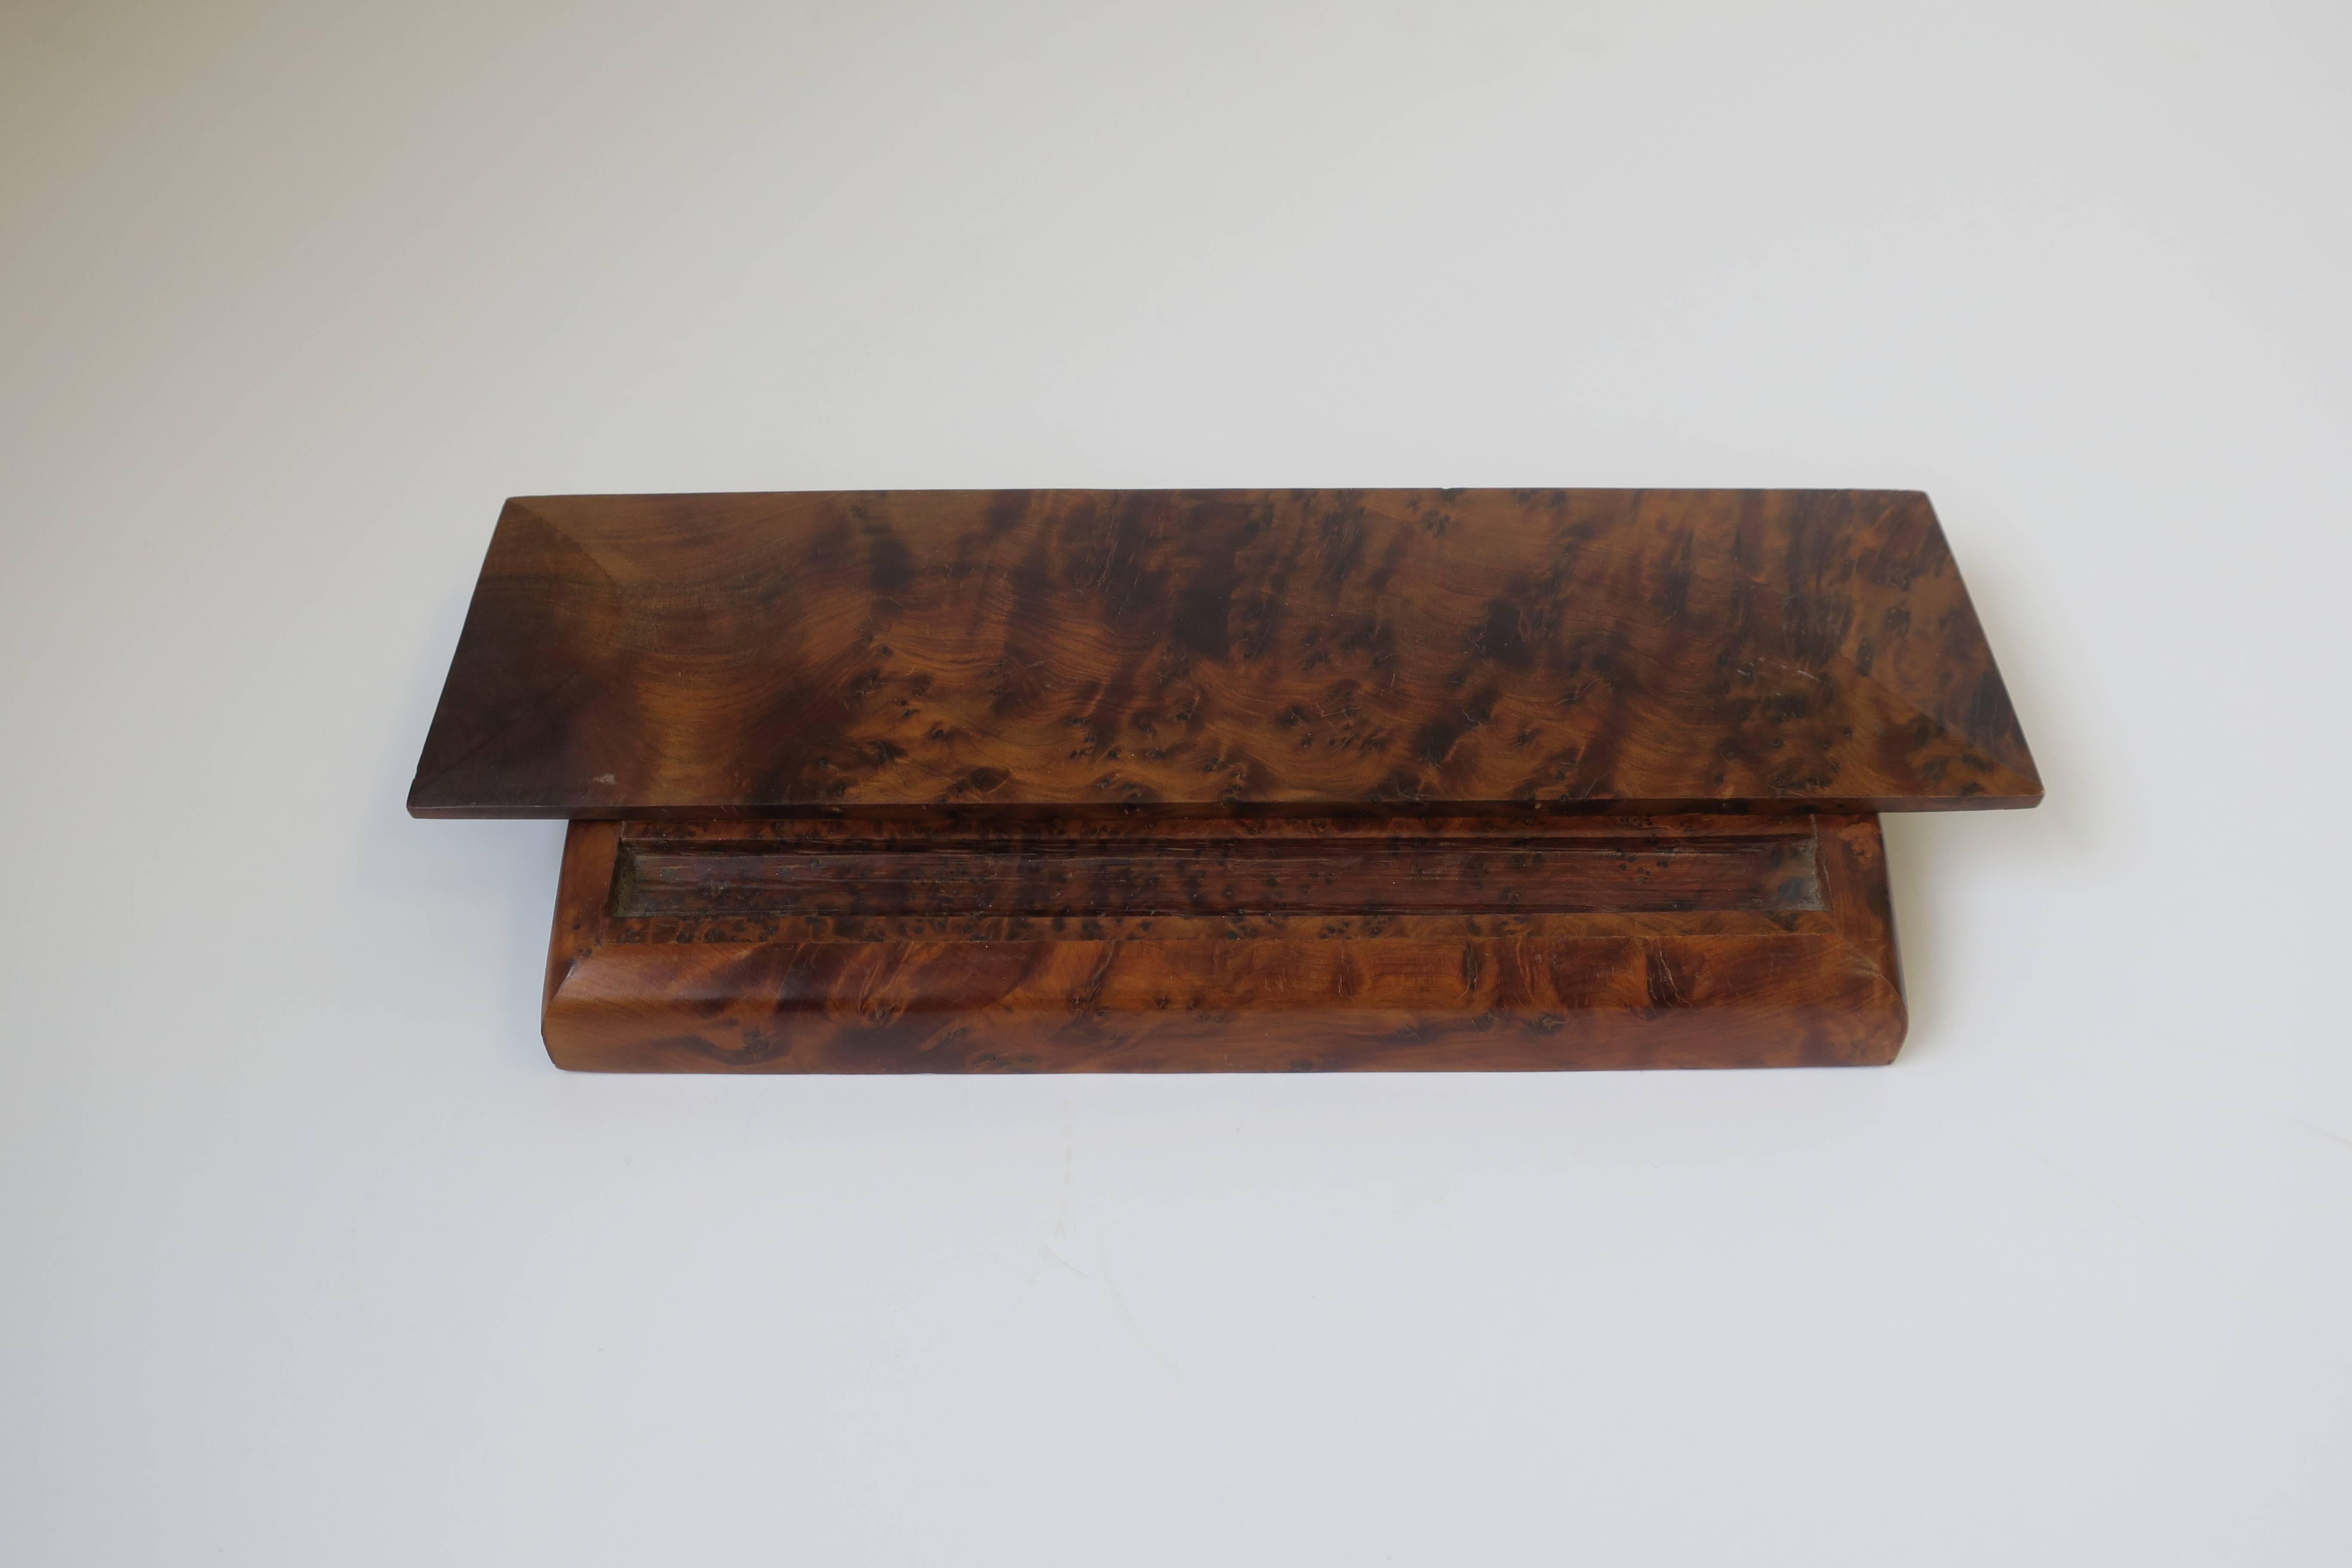 A beautiful rich burl wood vanity box or desk vessel, with area for pen or pencil. Box has a hinged lid (easy open/close.) Box is nice for smaller items such as cufflinks, earrings, rings, bracelets, etc., anything small you don't want to get